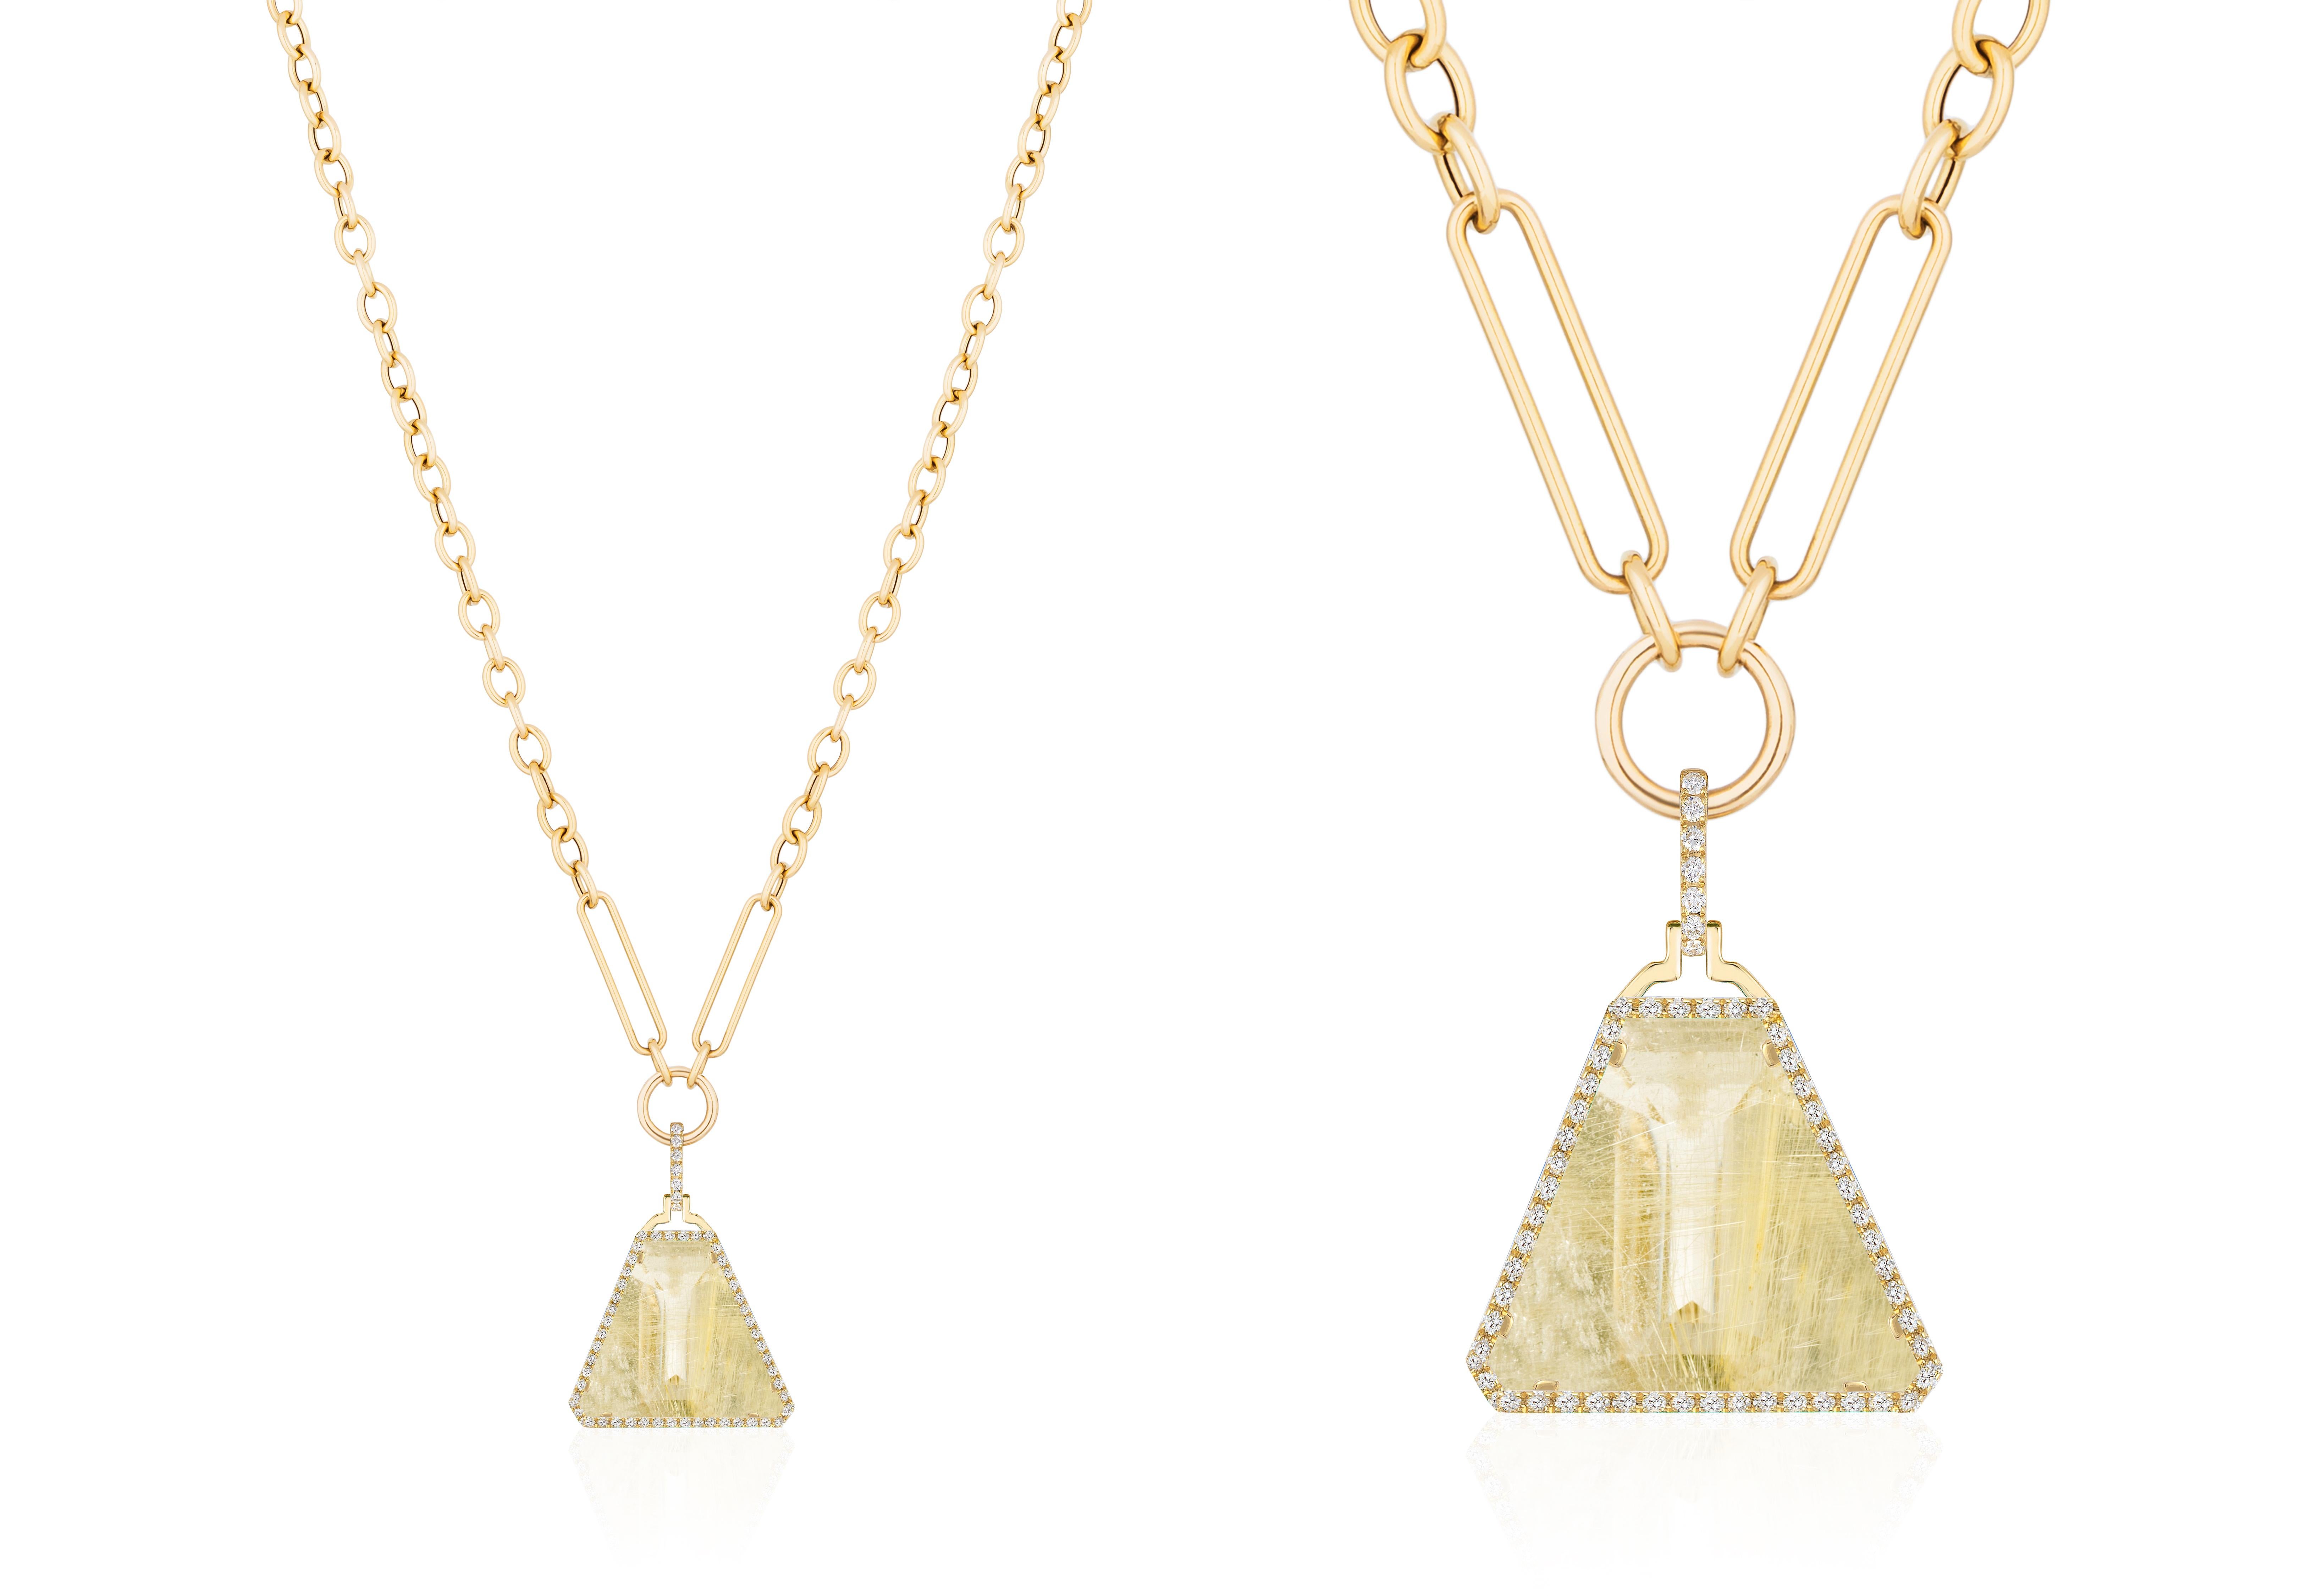 The Golden Rutilated Triangular Shape Pendant with Diamond in 18KT Yellow Gold is an exquisite piece of jewelry from the 'G-One' Collection. Crafted with meticulous attention to detail, this pendant showcases a unique triangular shape that adds a